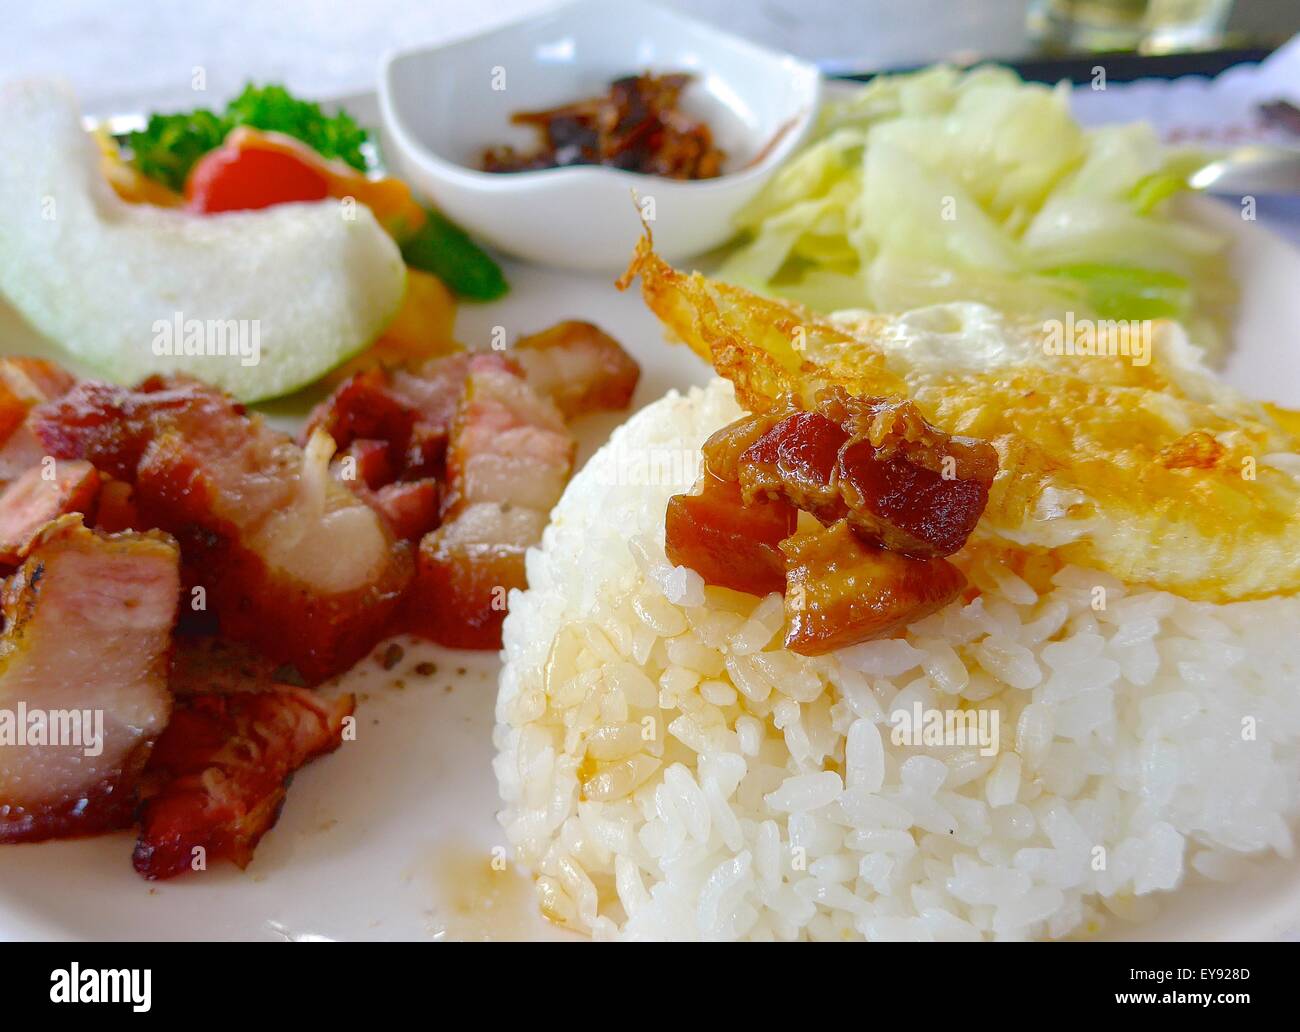 Aboriginal style of meals in southern Taiwan Stock Photo